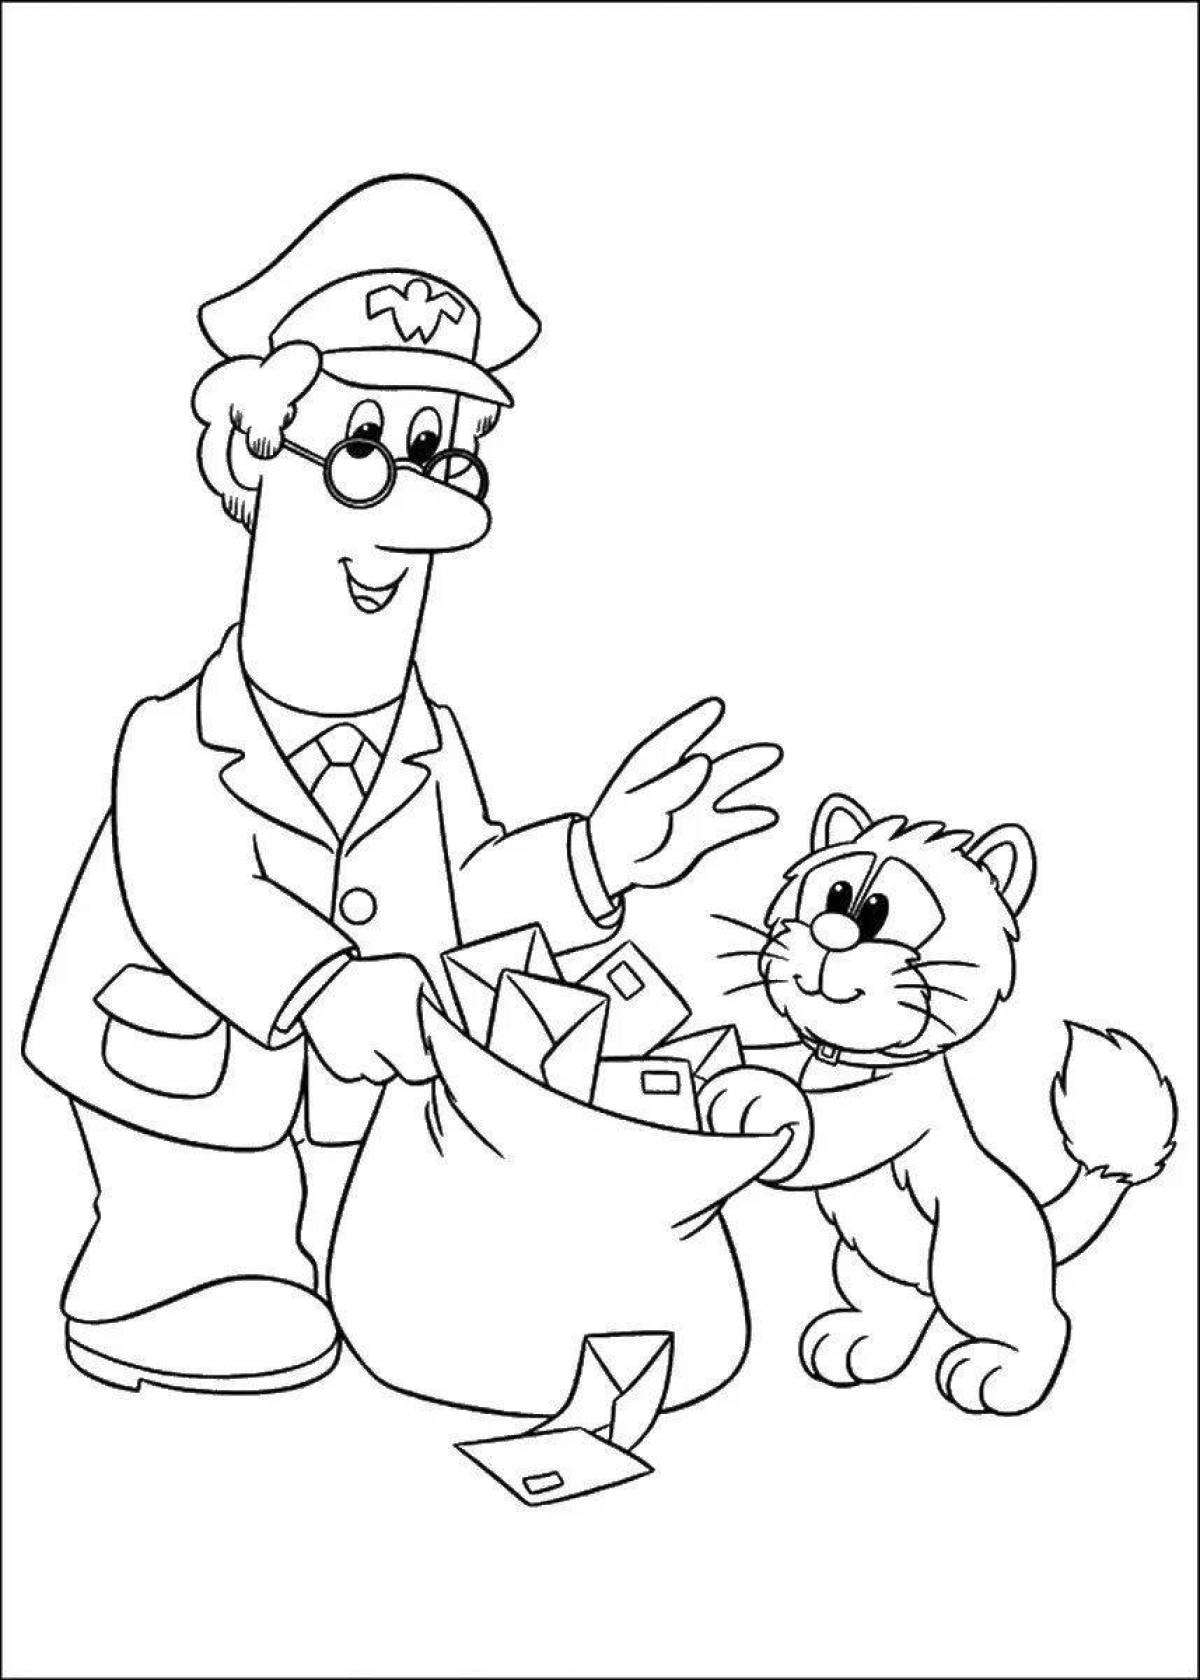 Attractive mail coloring book for preschoolers